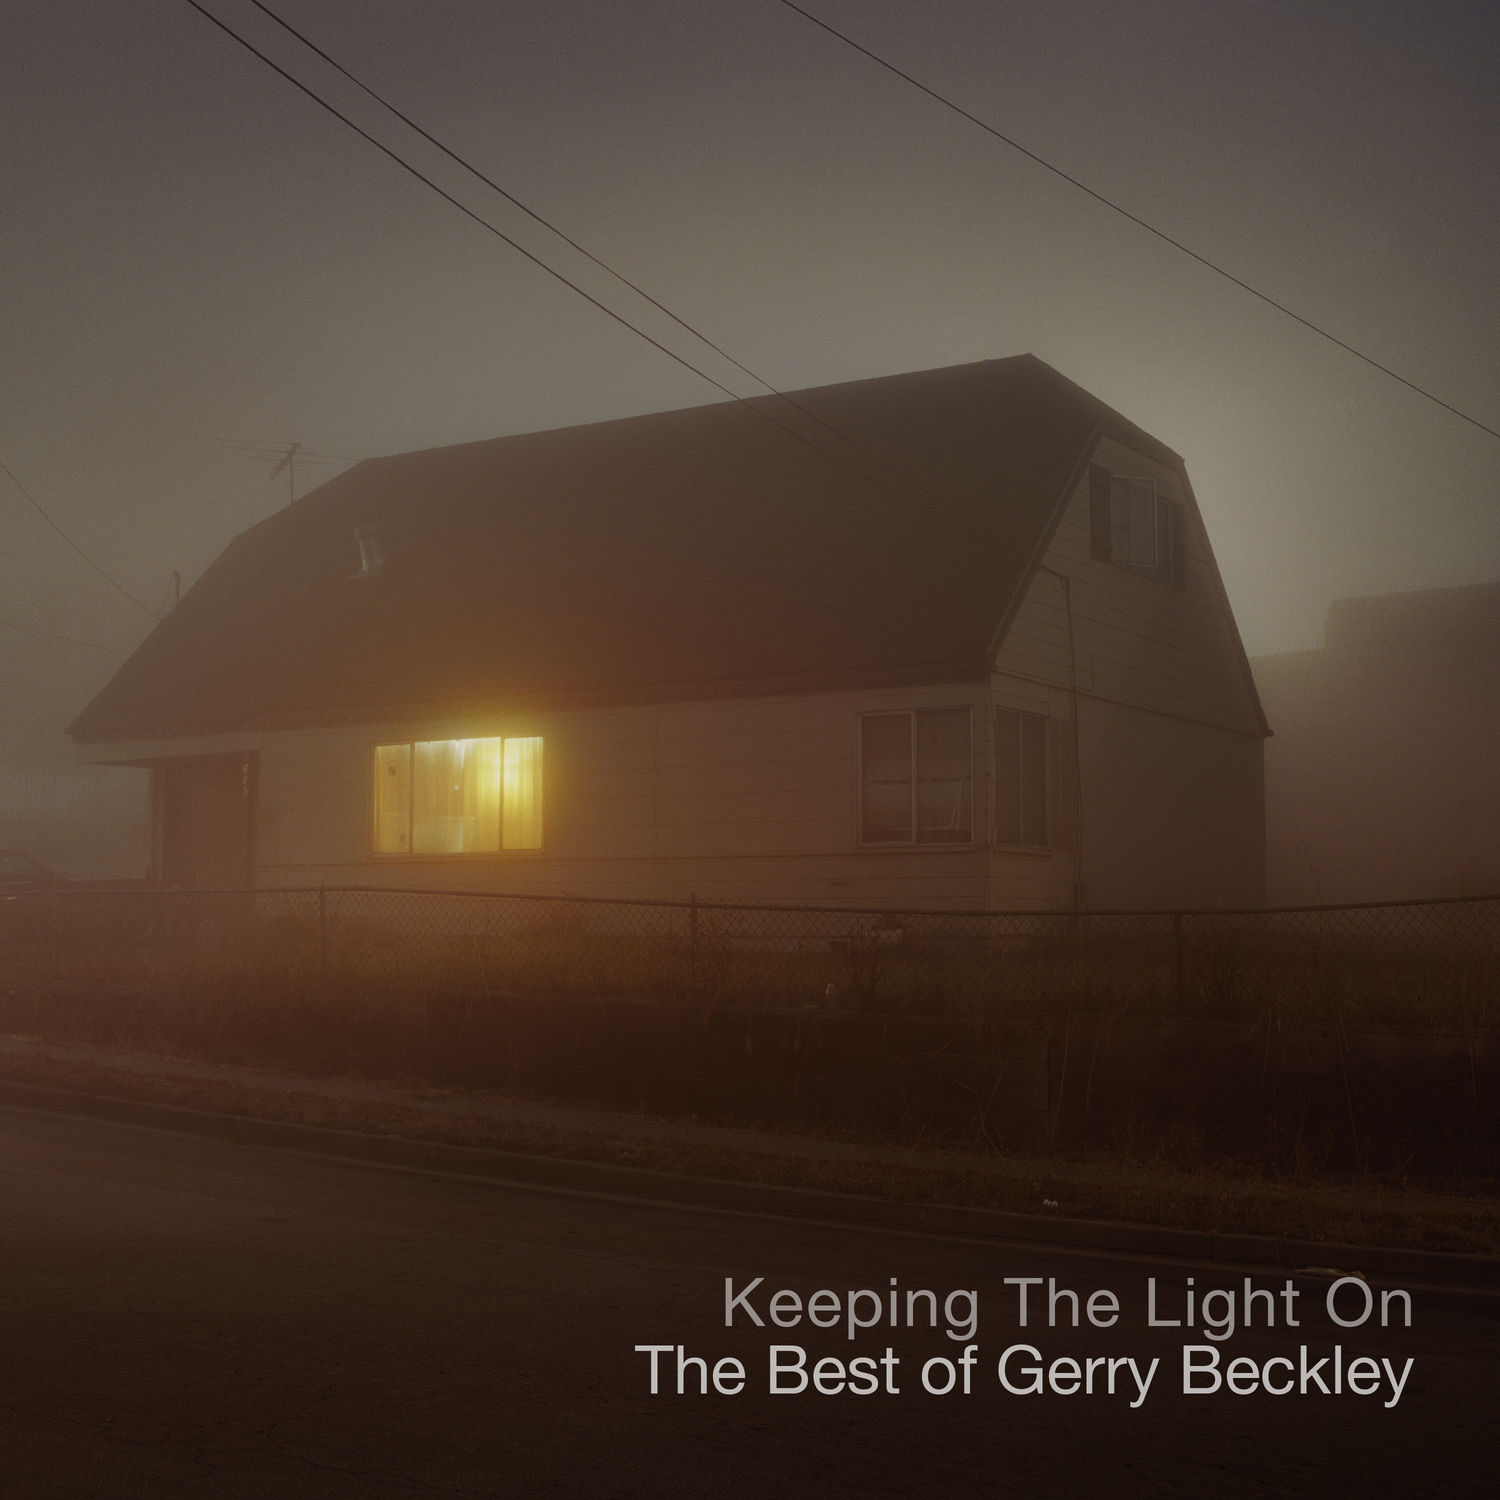 Gerry Beckley – Keeping the Light On: The Best of Gerry Beckley (2021) [FLAC 24bit/96kHz]